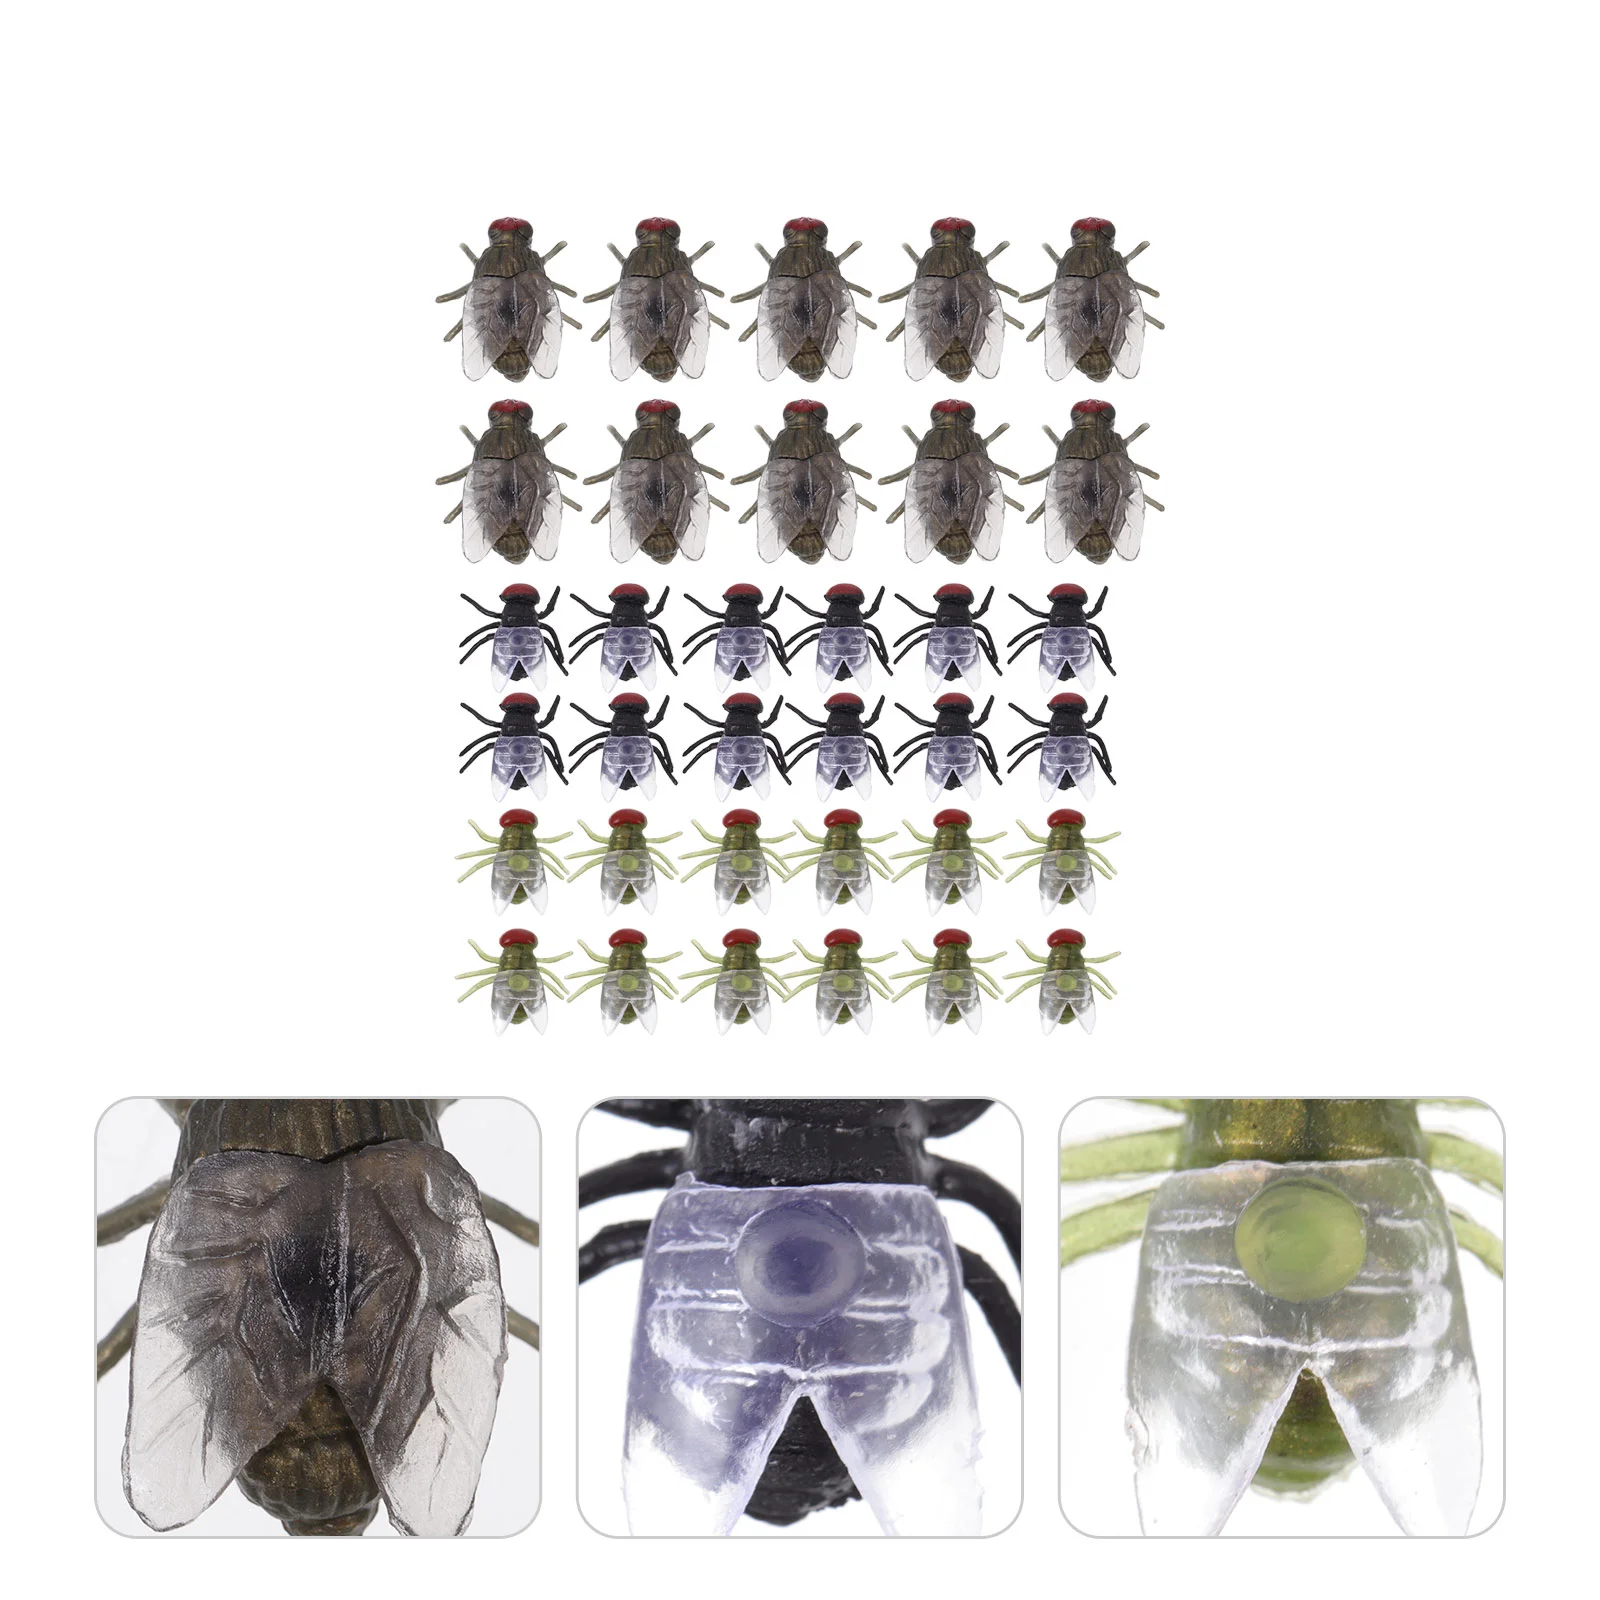 

60 Pcs Fly Model Animal Toys Insect Funny Fake Flies Ants Prank Props Tricky Pvc Plastic Blowfly Artificial Useless Bizarre